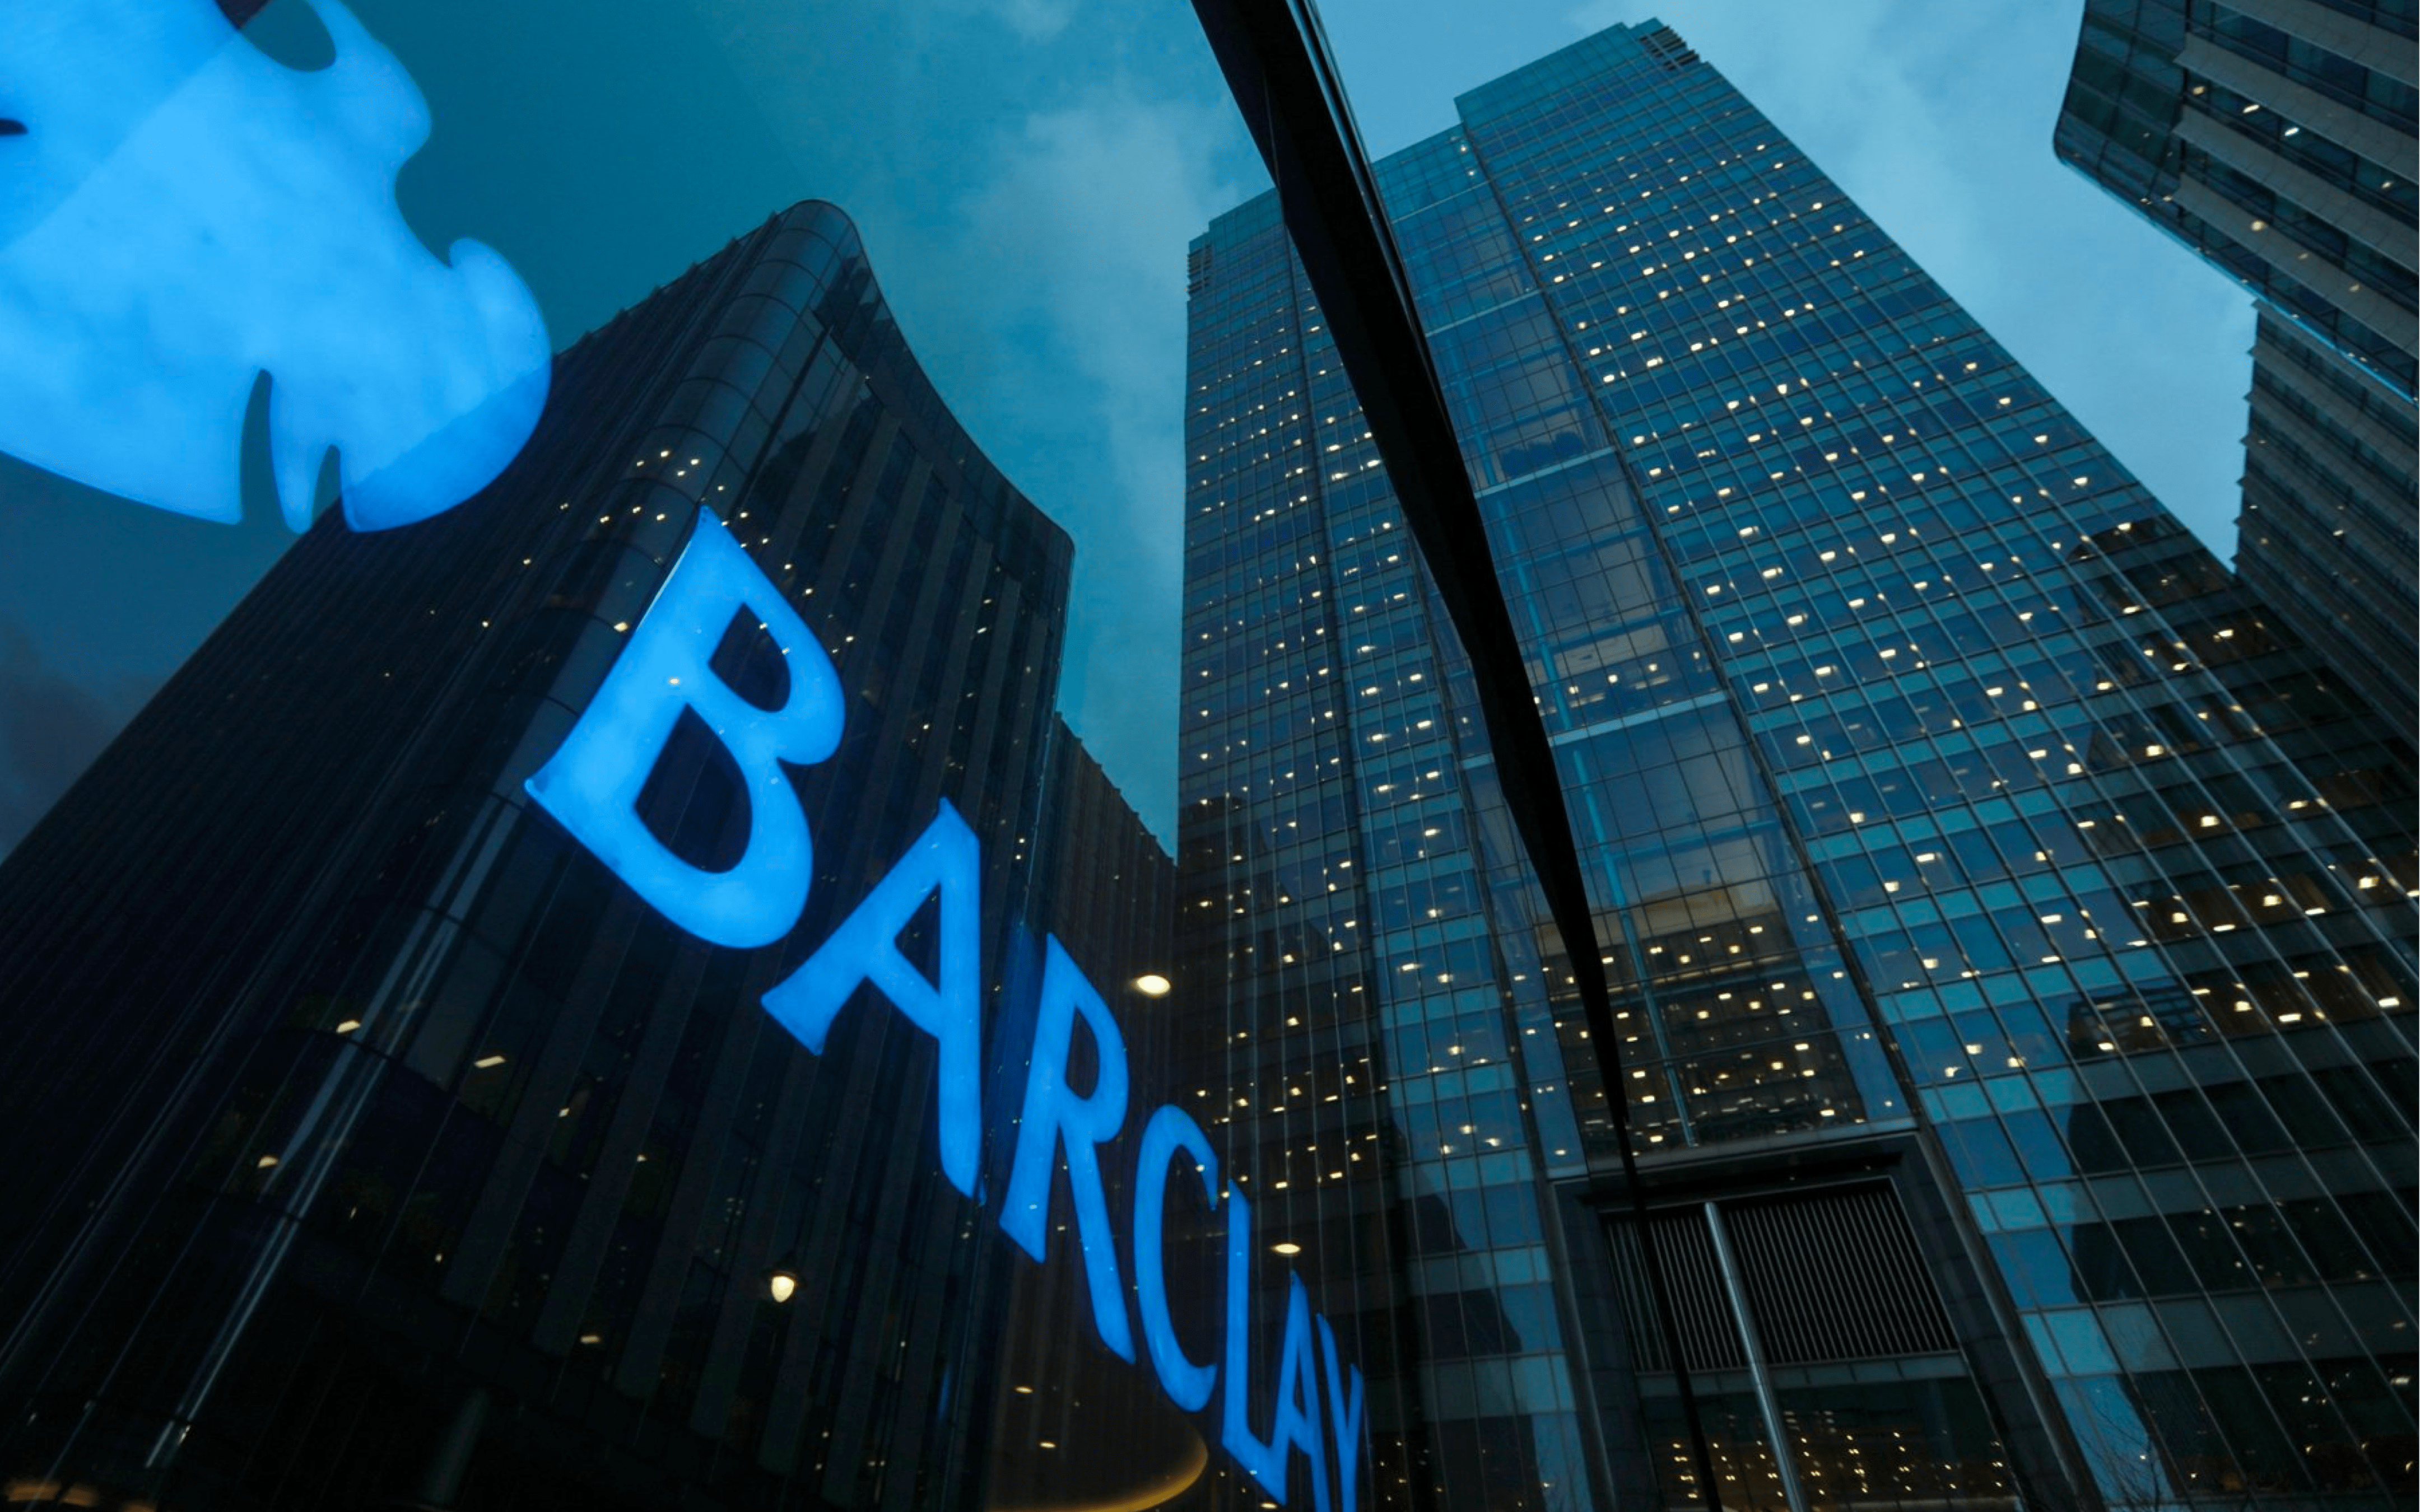 Barclays office building